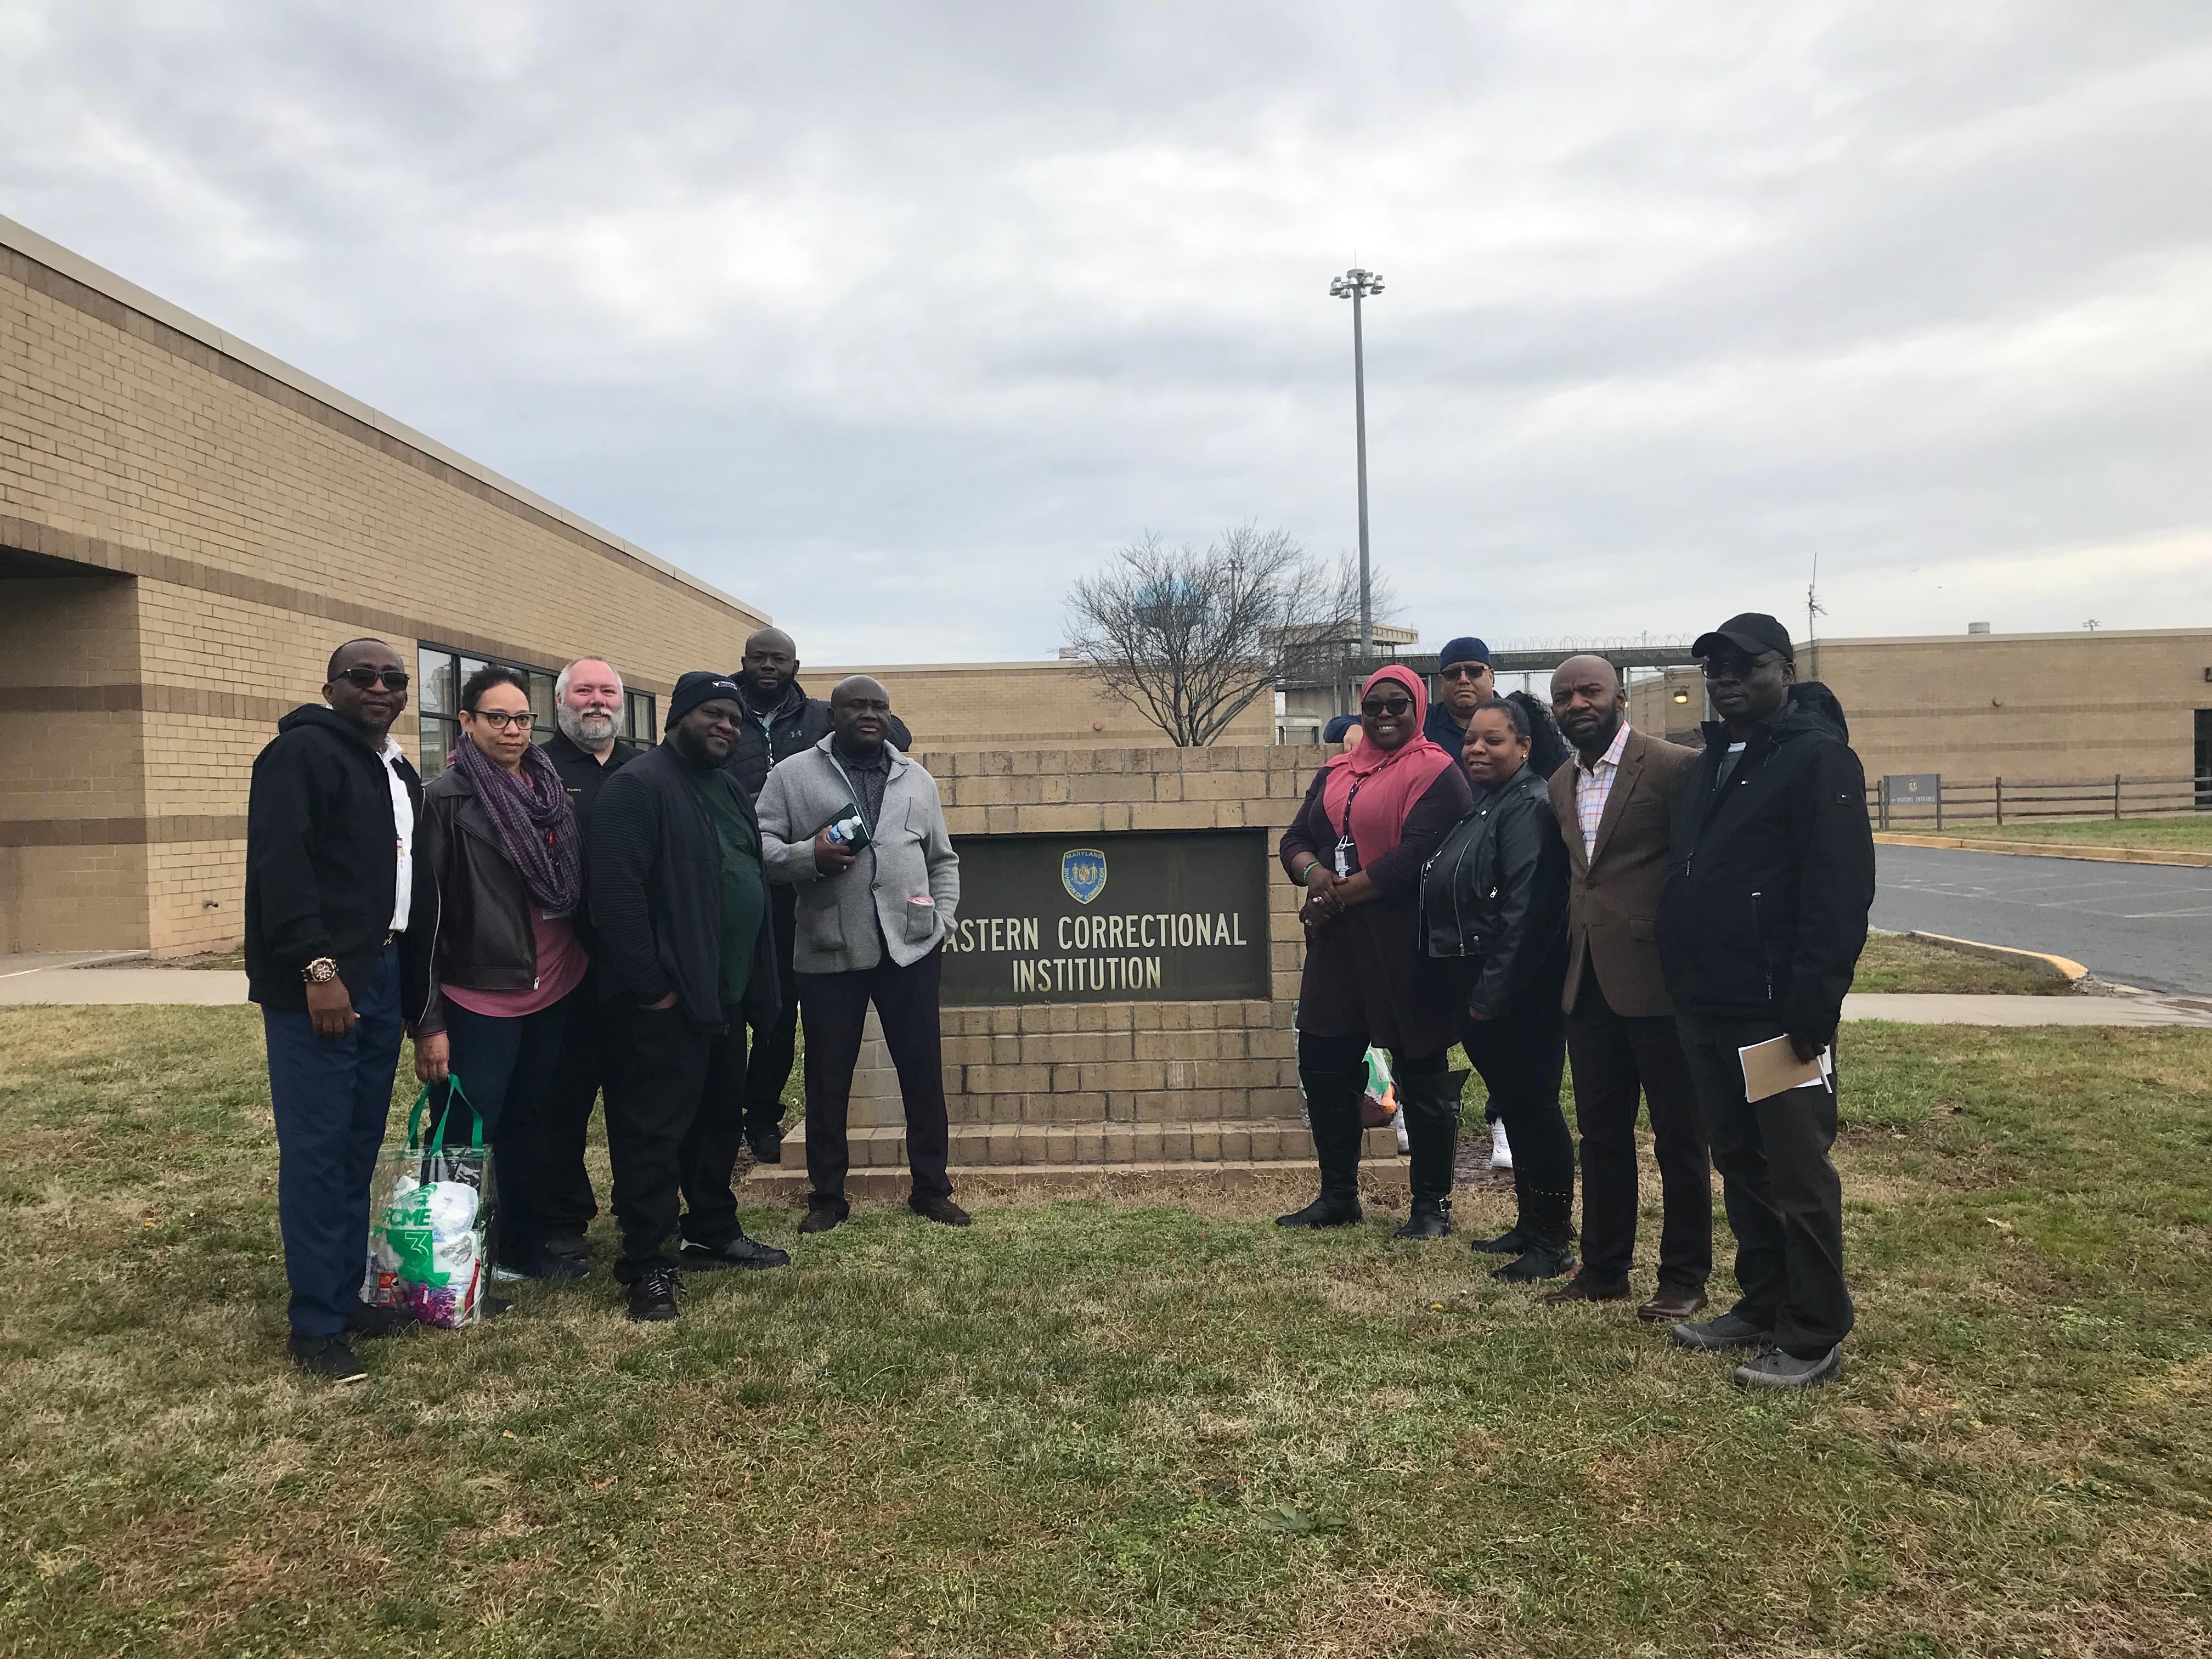 Members of the DPSCS staffing analysis team stand together in front of the Eastern Correctional Institution sign